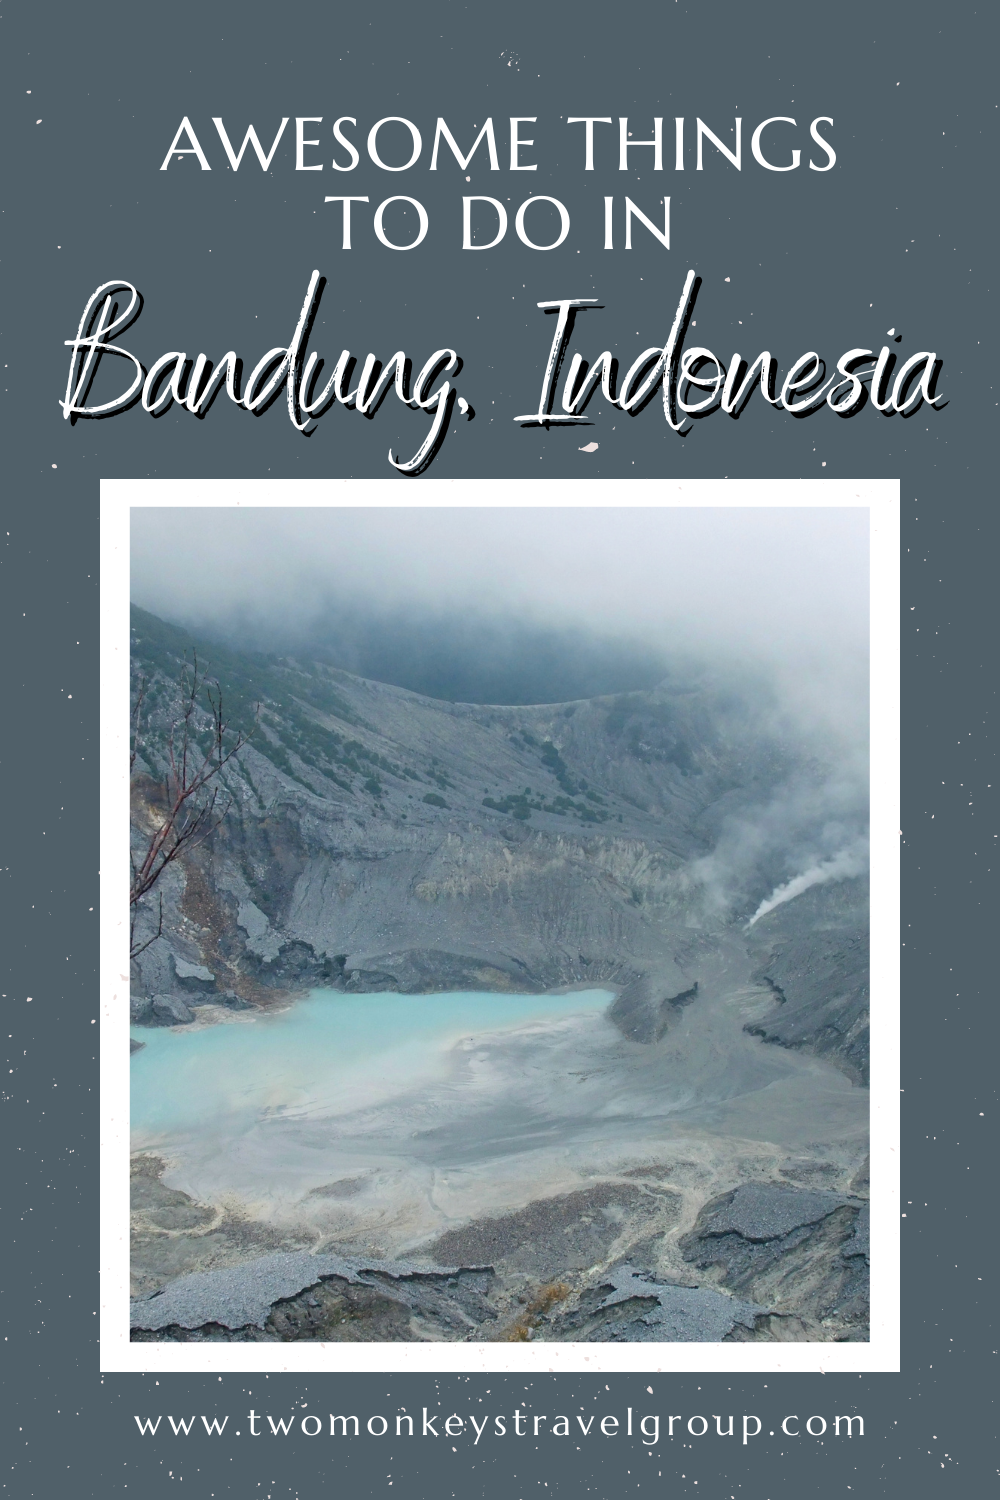 7 Awesome Things to Do in Bandung, Indonesia